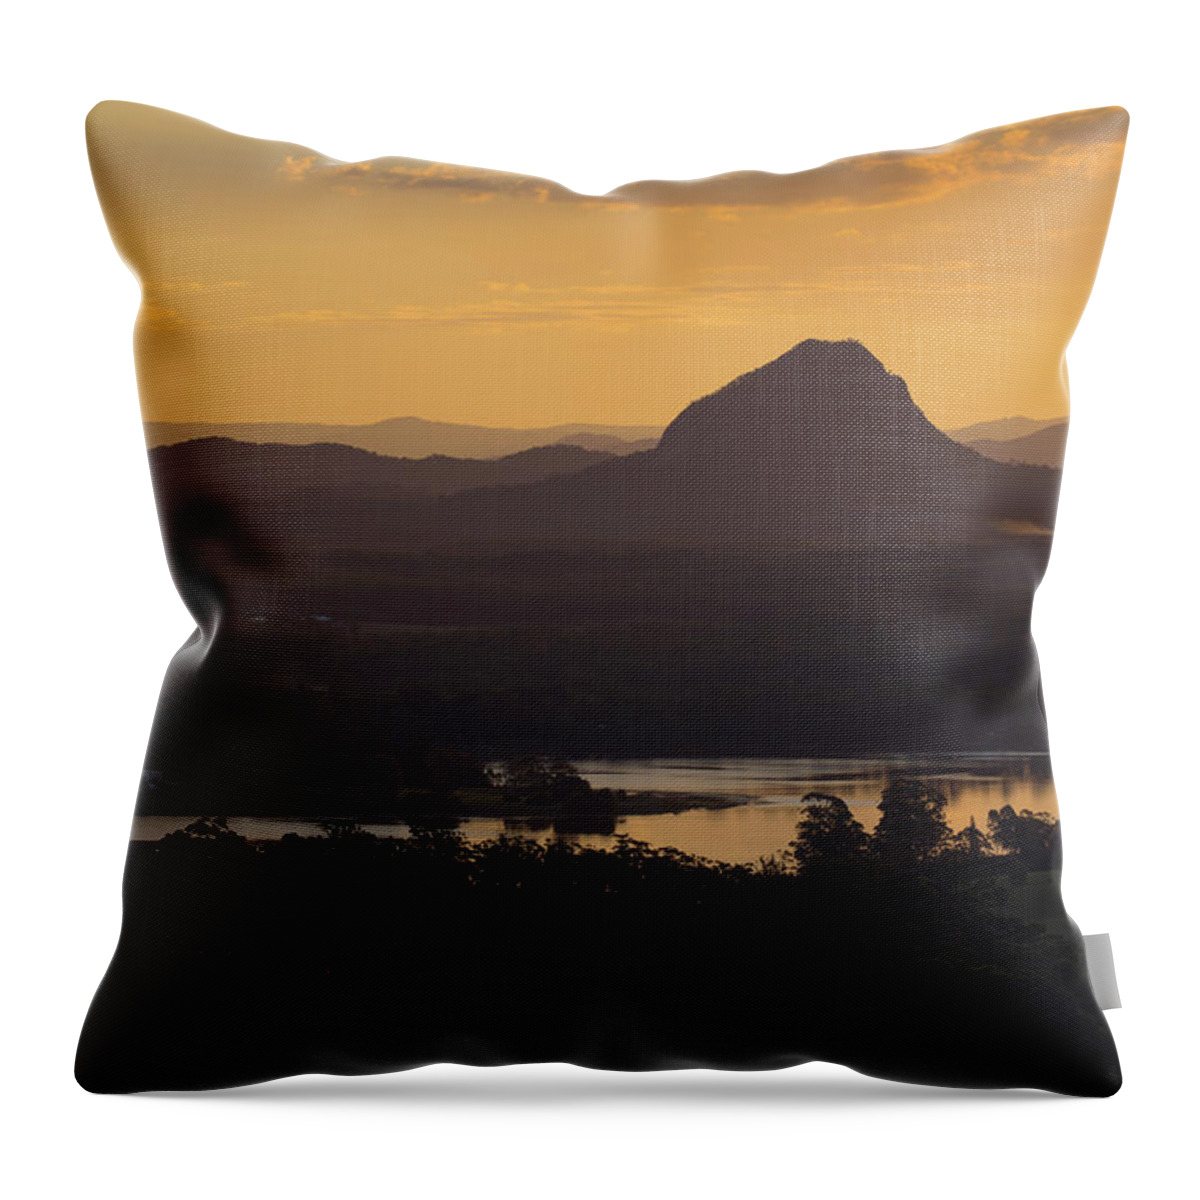 Landscape Throw Pillow featuring the photograph Noosa Hinterland by Nicolas Lombard